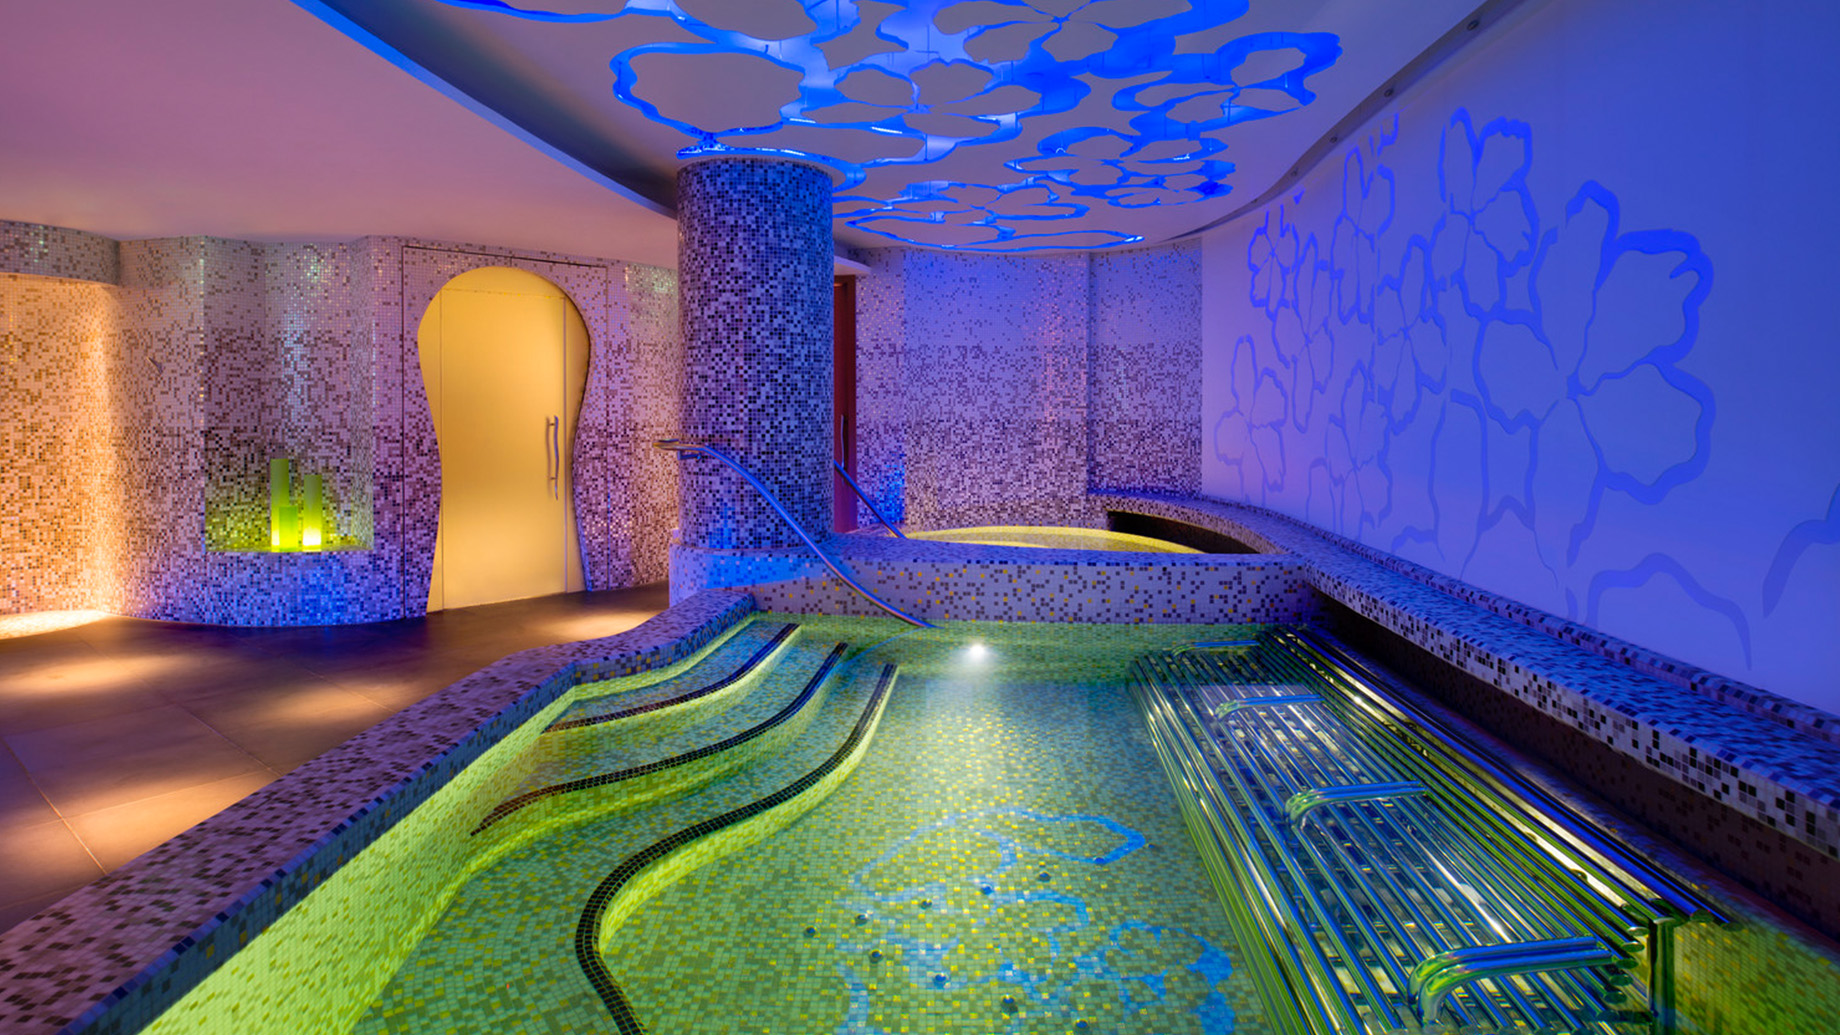 AWAY Spa illuminated with a decompression area, sauna, steam room, whirlpool, pool, herbal bath and experiential showers.